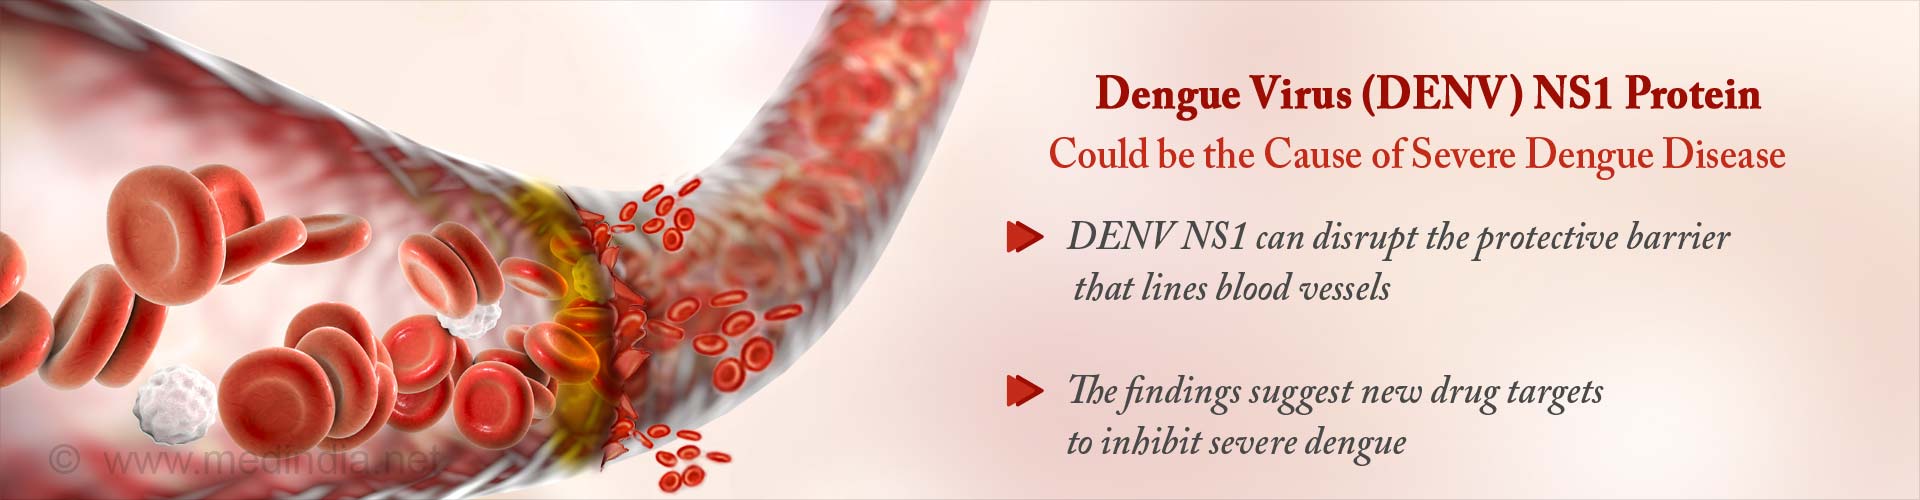 dengue virus (DENV) NS1 protein could be the cause of severe dengue disease
- (DENV) NS1 can disrupt the protective barrier that lines blood vessels
- The findings suggest new drug targets to inhibit severe dengue